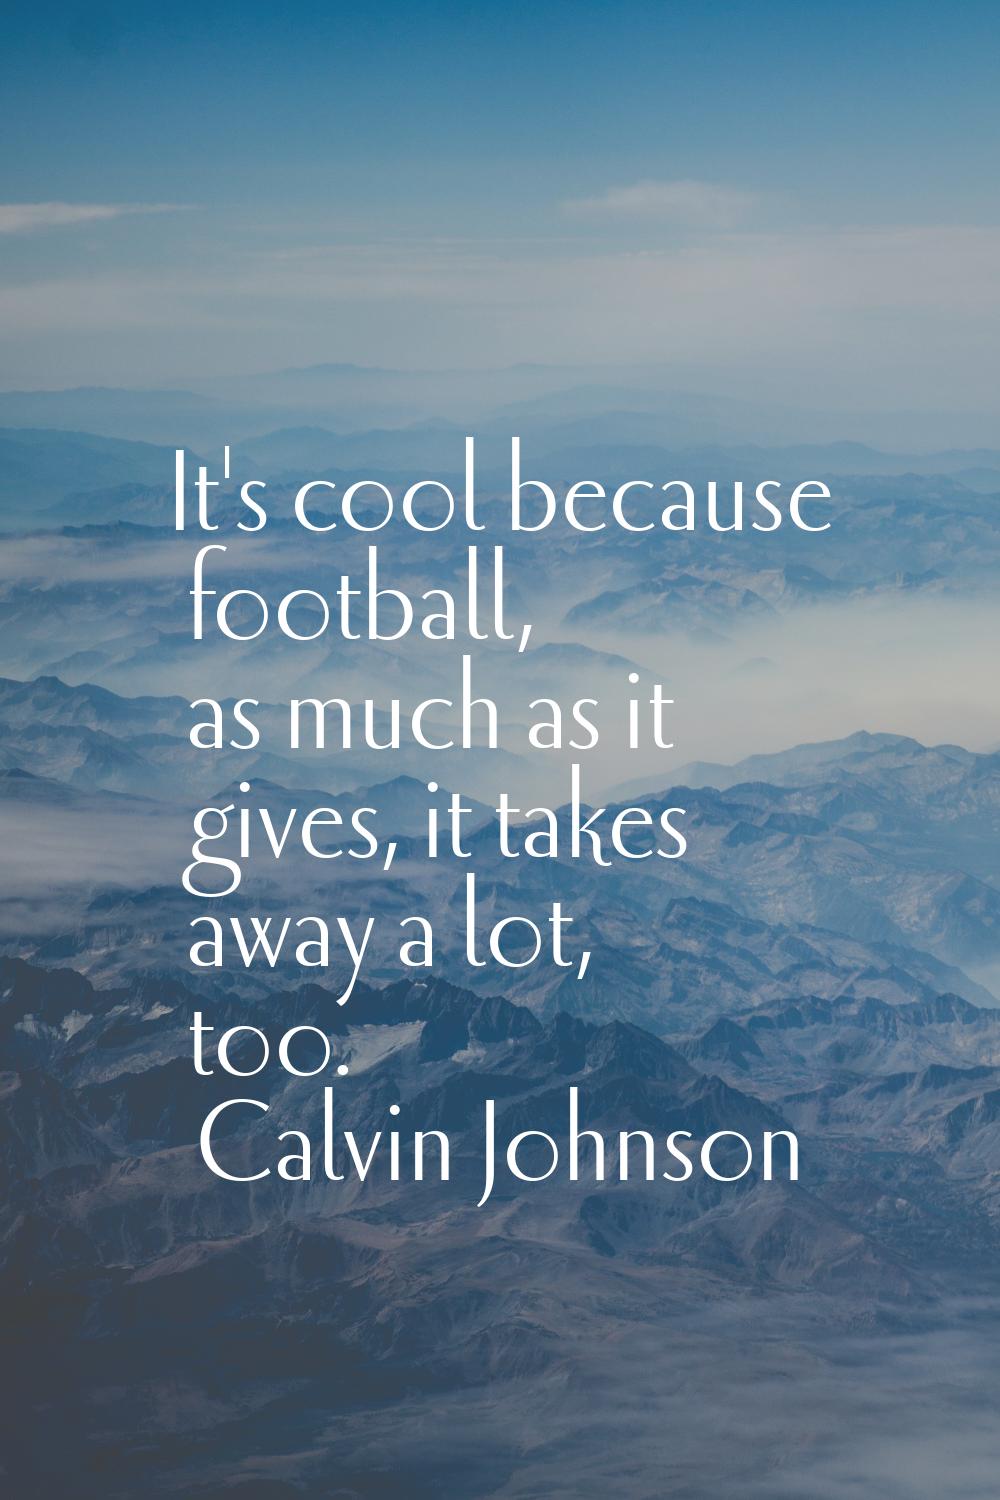 It's cool because football, as much as it gives, it takes away a lot, too.